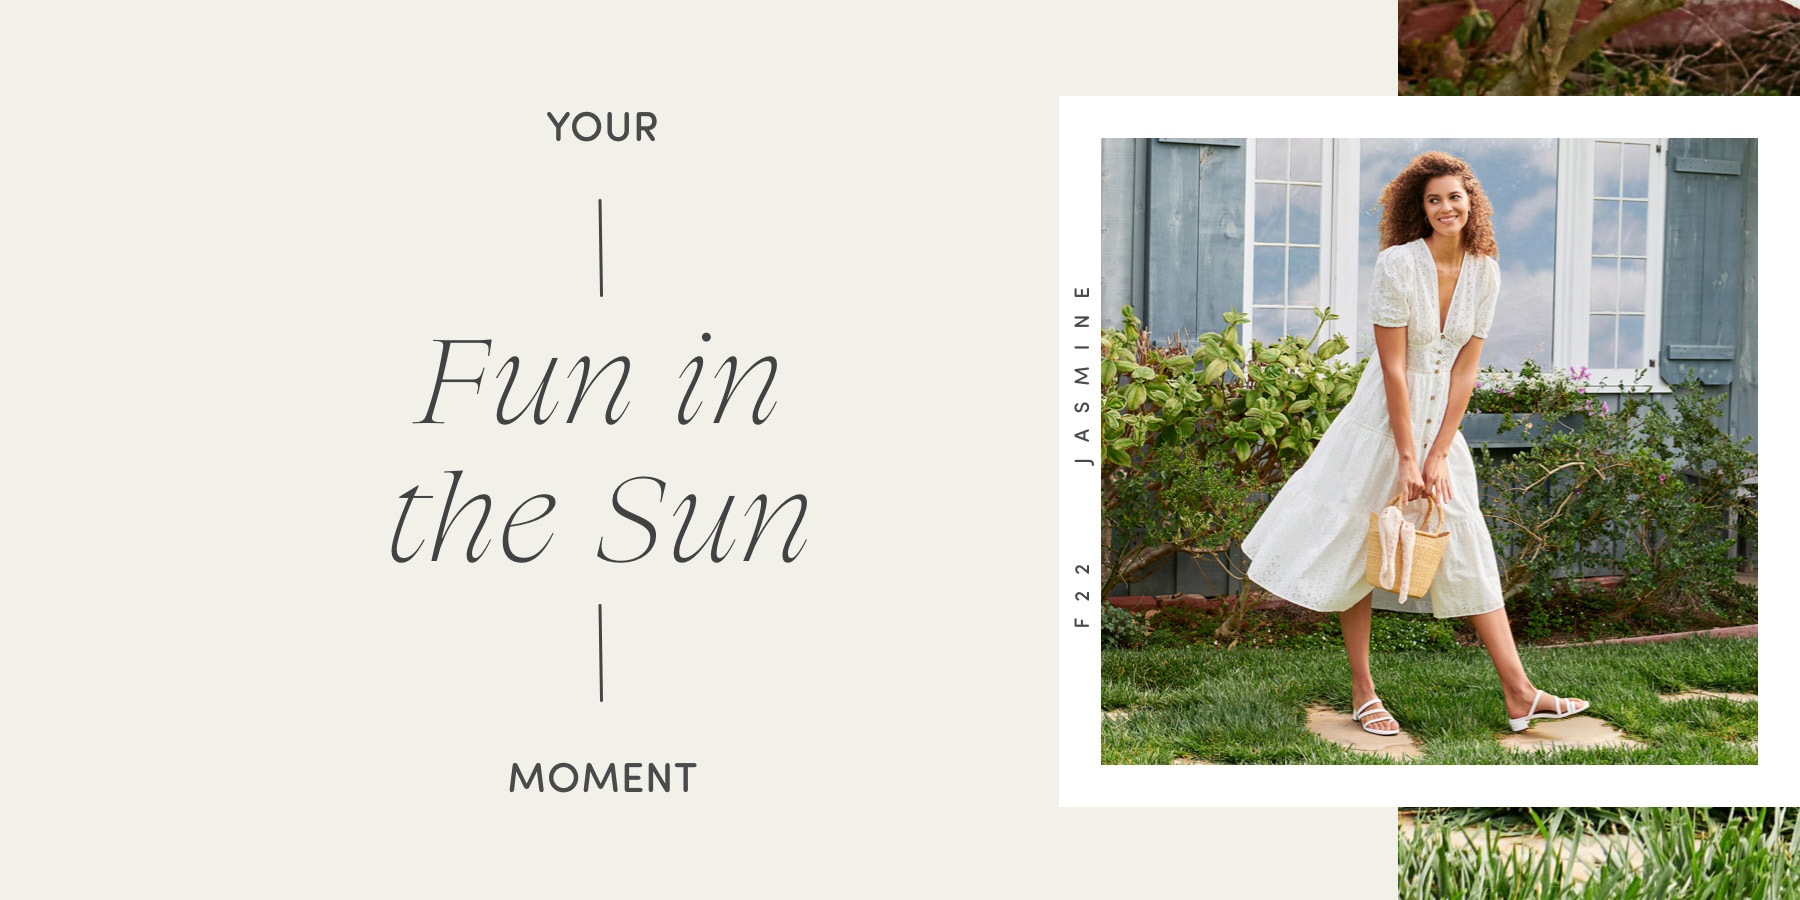 Your fun in the sun moment